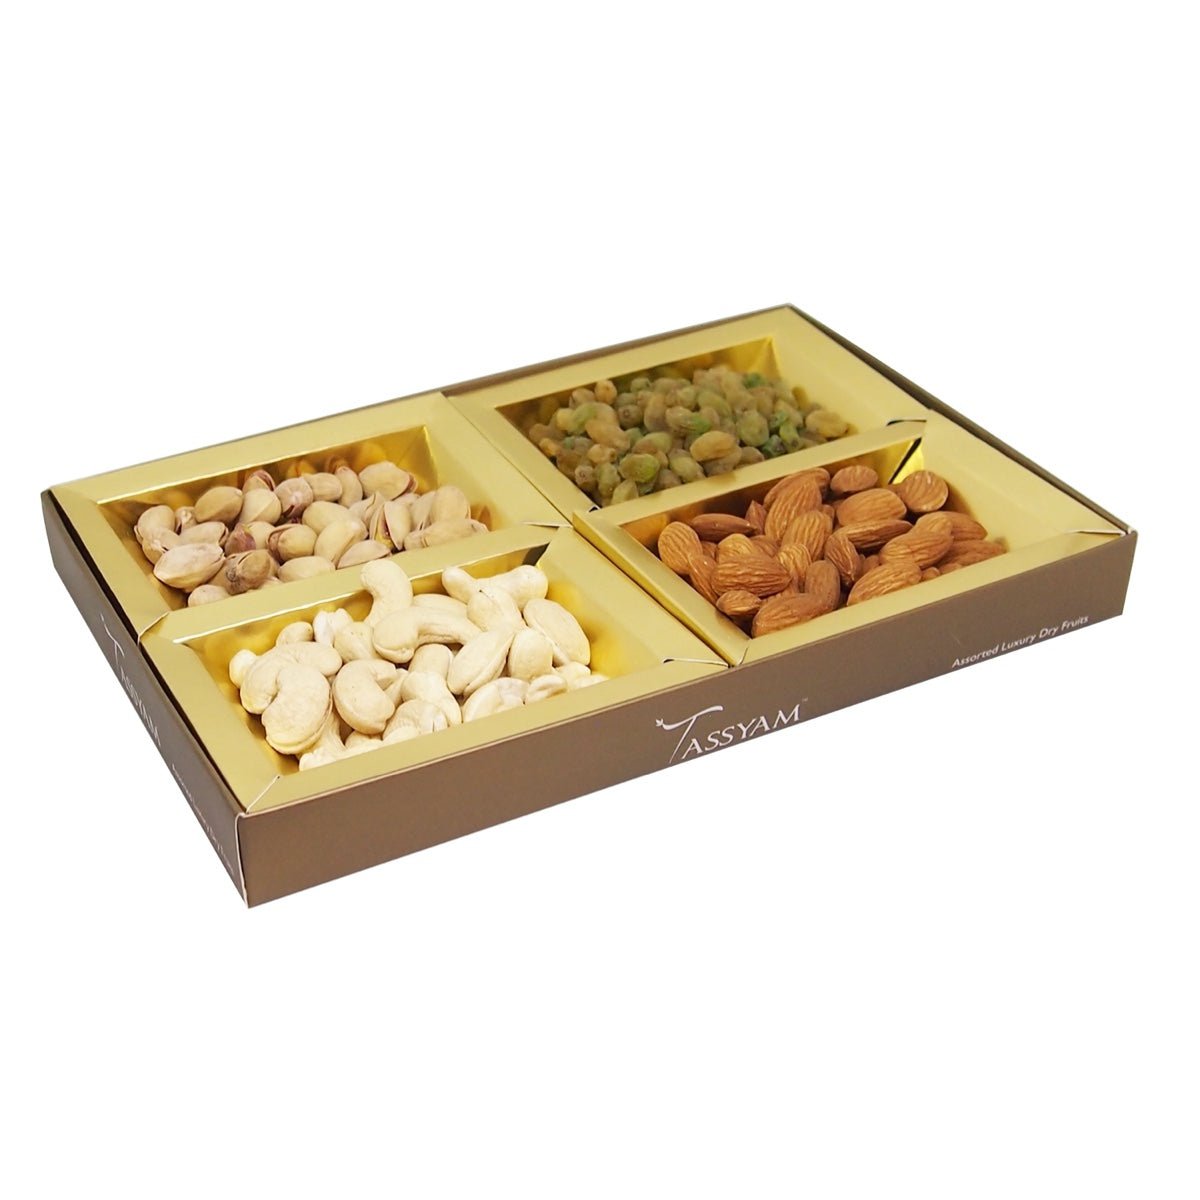 Buy our fresh nuts & dried fruit gift tray at broadwaybasketeers.com